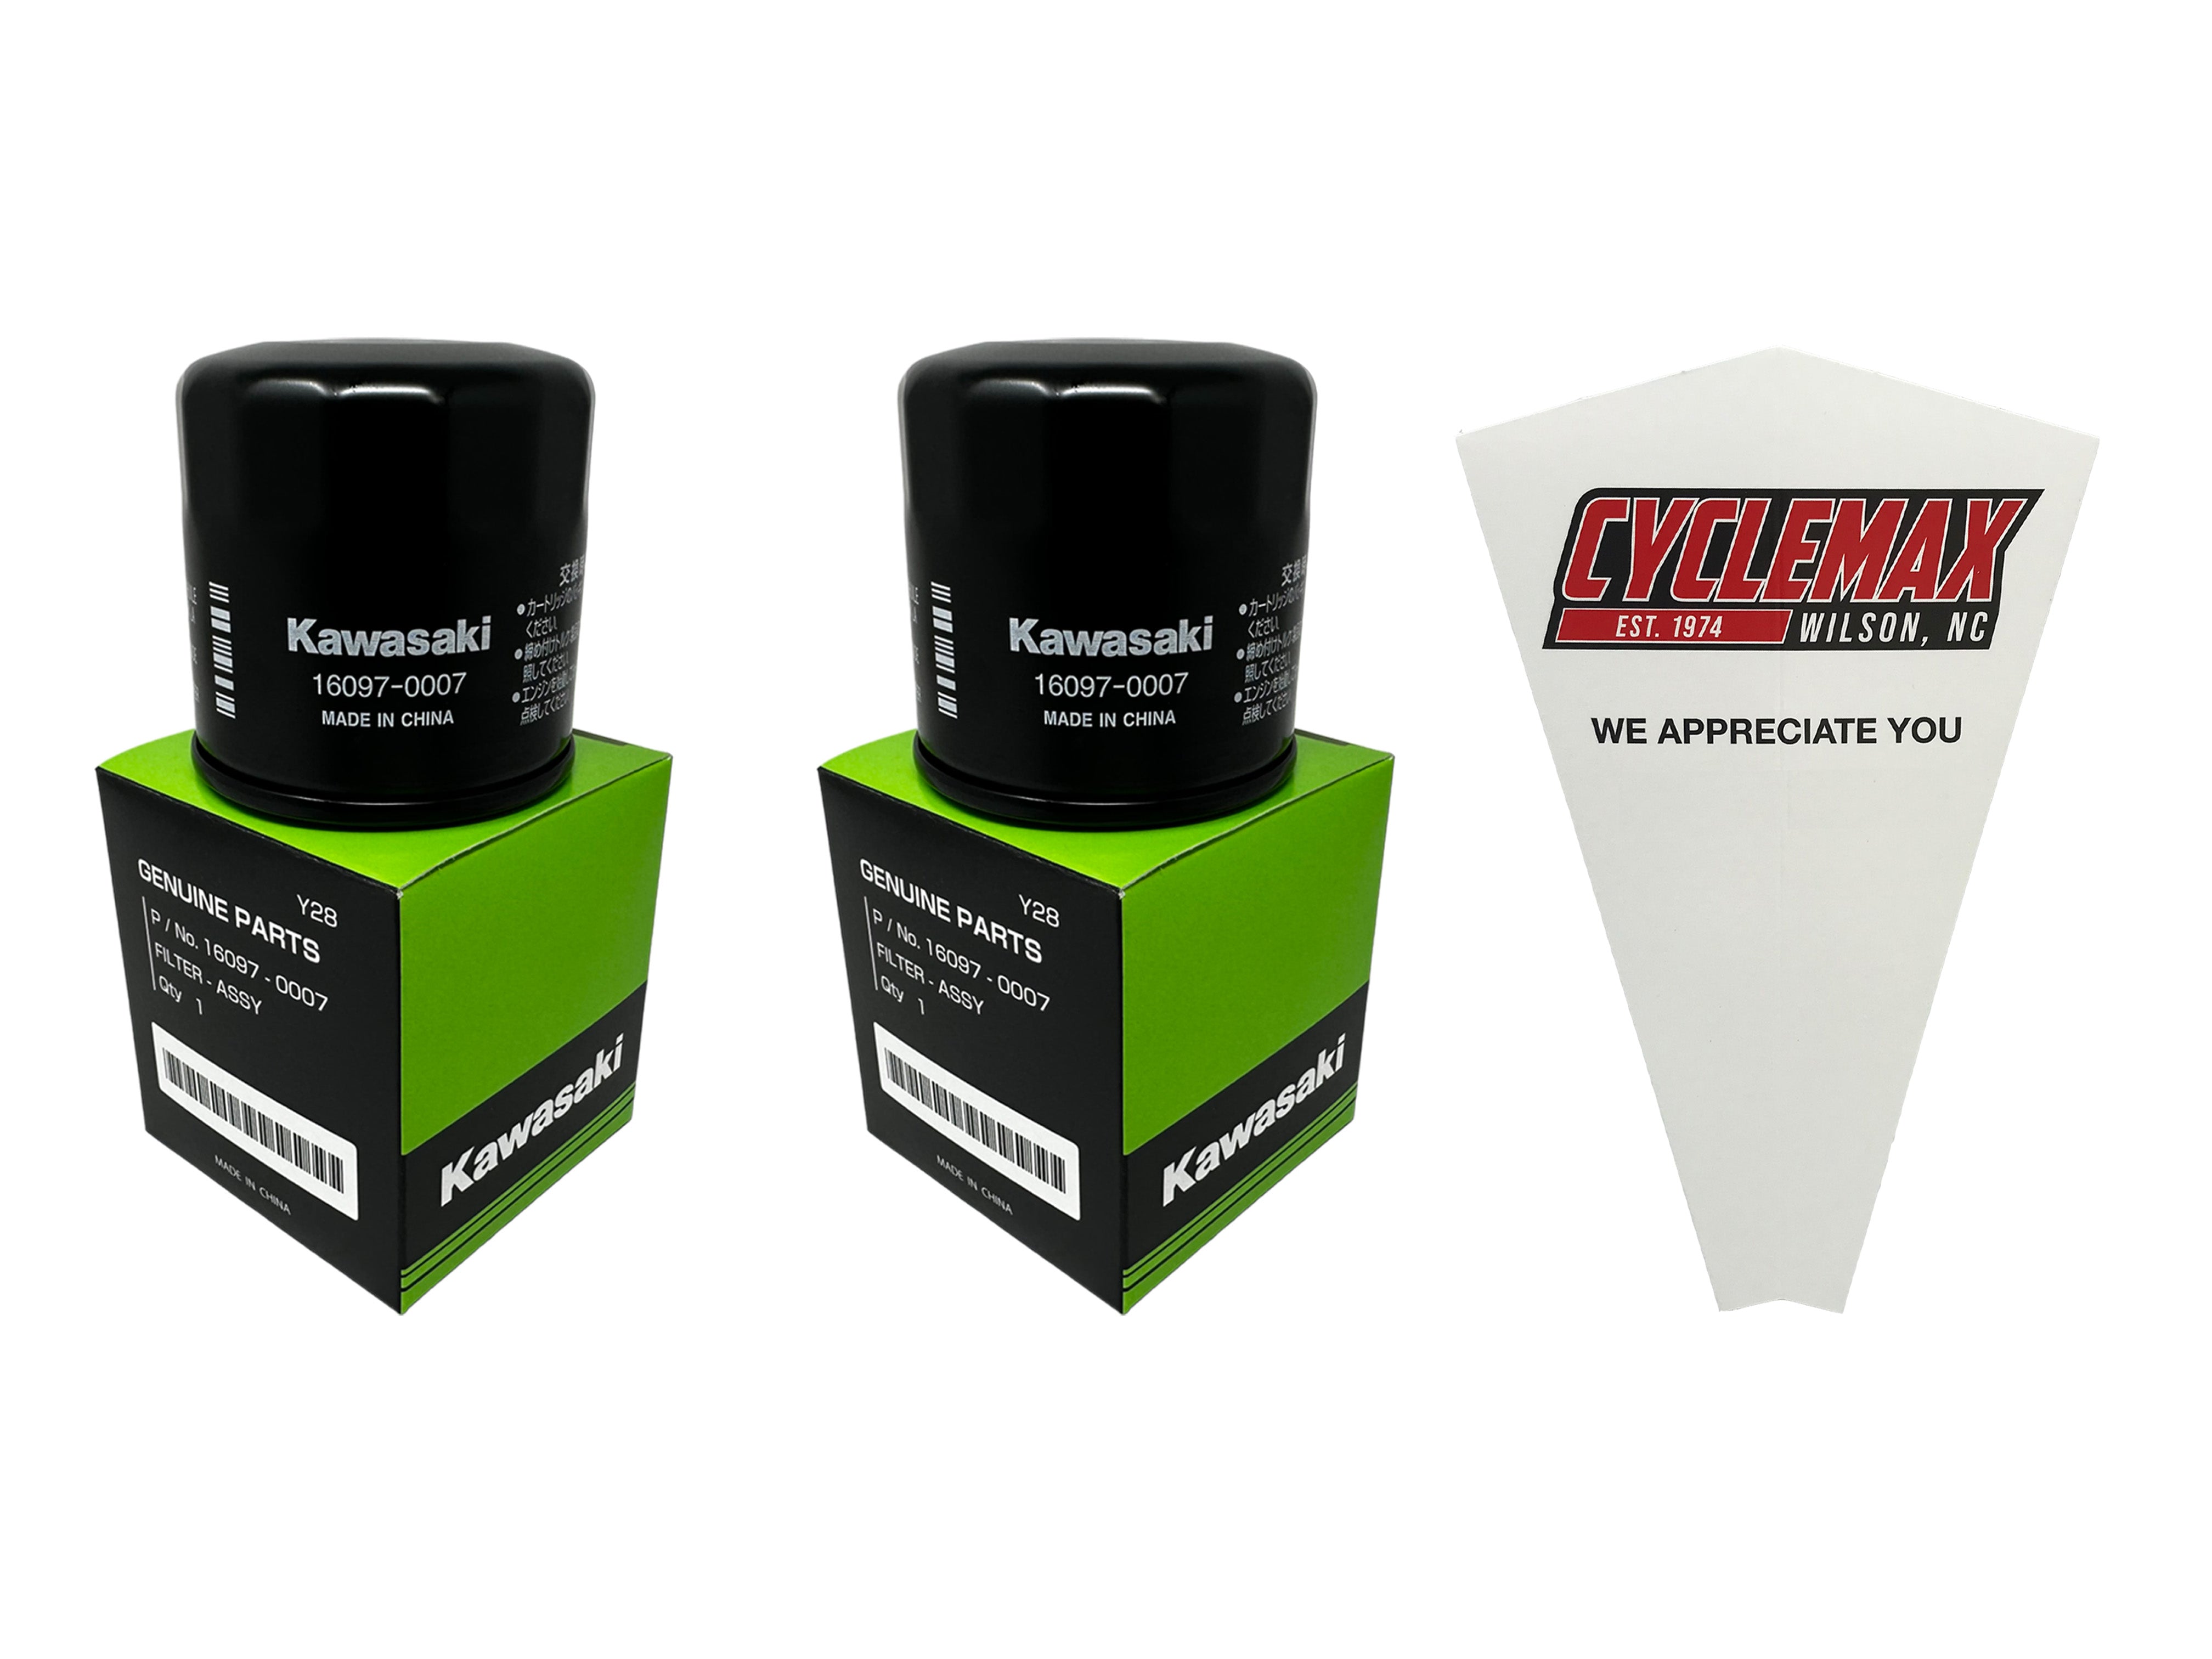 Cyclemax Two Pack for Kawasaki Oil Filter 16097-0007 Contains Two Filters and a Funnel